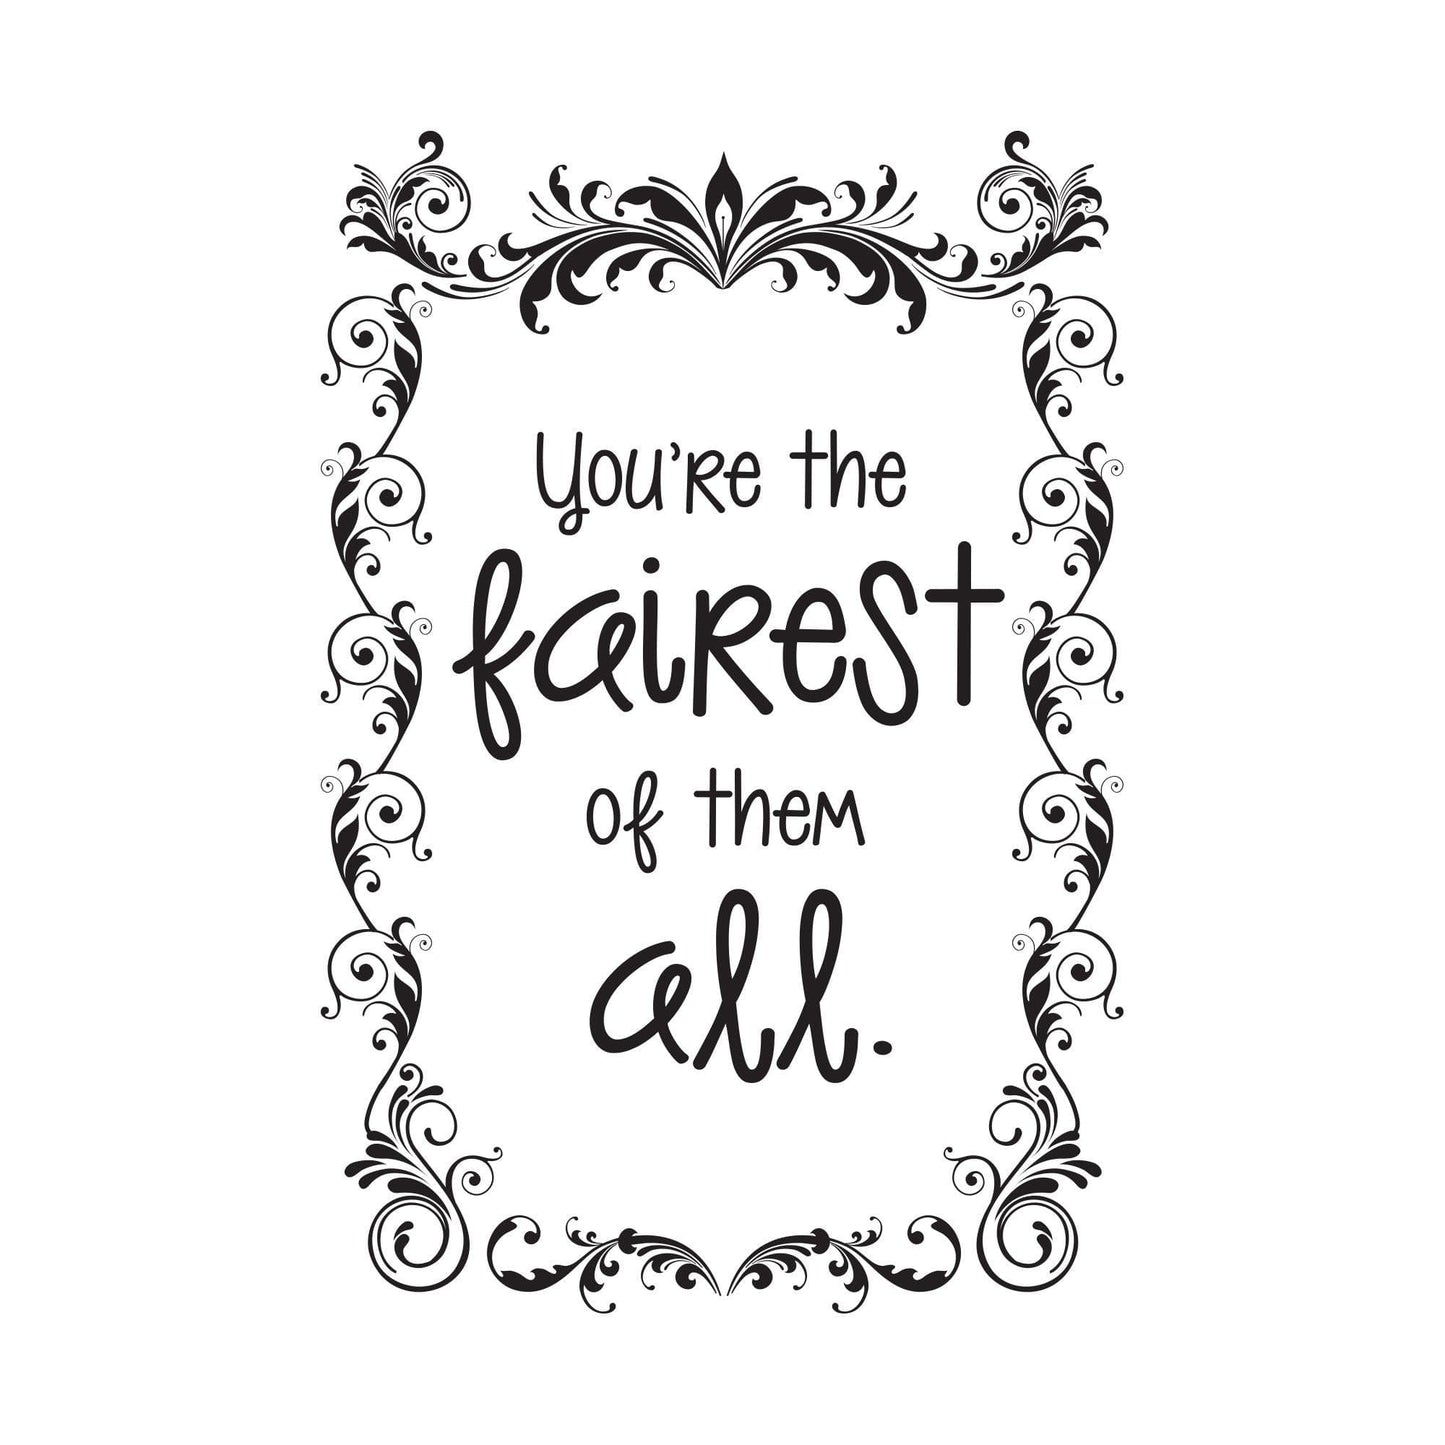 Fairy Tale Quote. You're the Fairest of Them All Quote. #OS_DC619